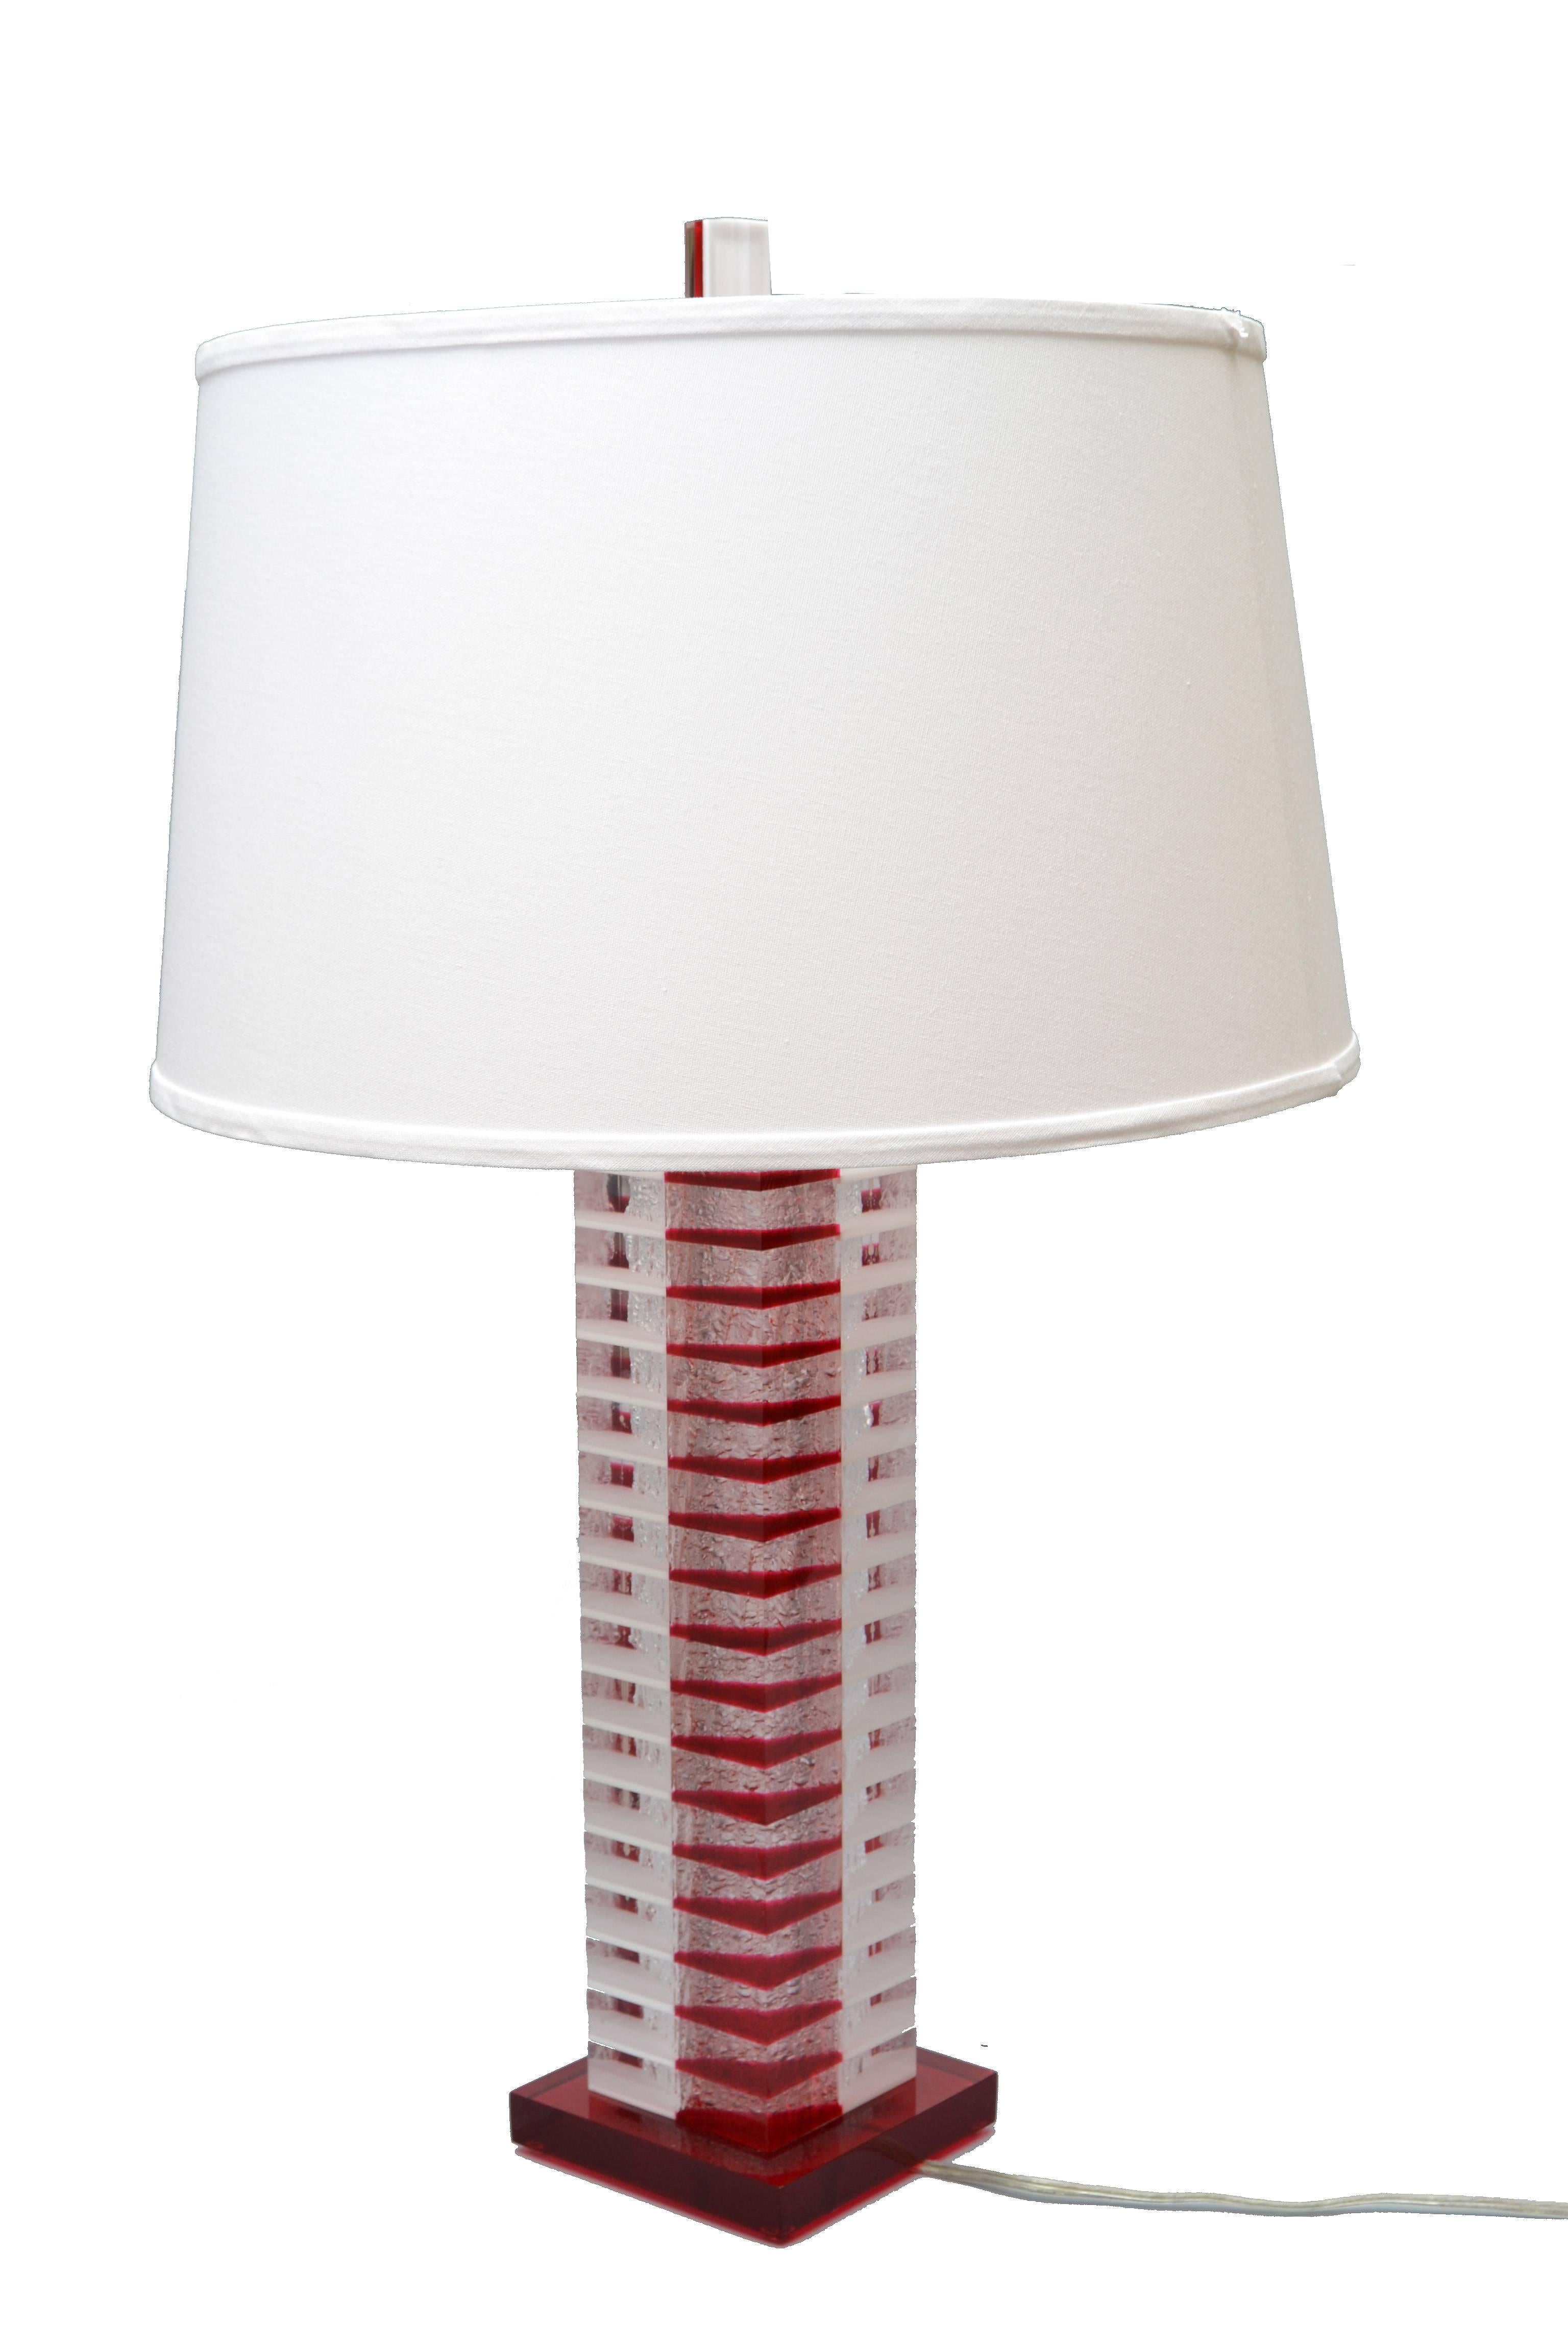 Modern Lucite table lamp in red, white and transparent Lucite pieces with Nickel Hardware. 
Wired for the U.S. and uses a regular or LED light bulb.
The shade is not included.
Measures: Height to top of socket: 22.5 inches.
